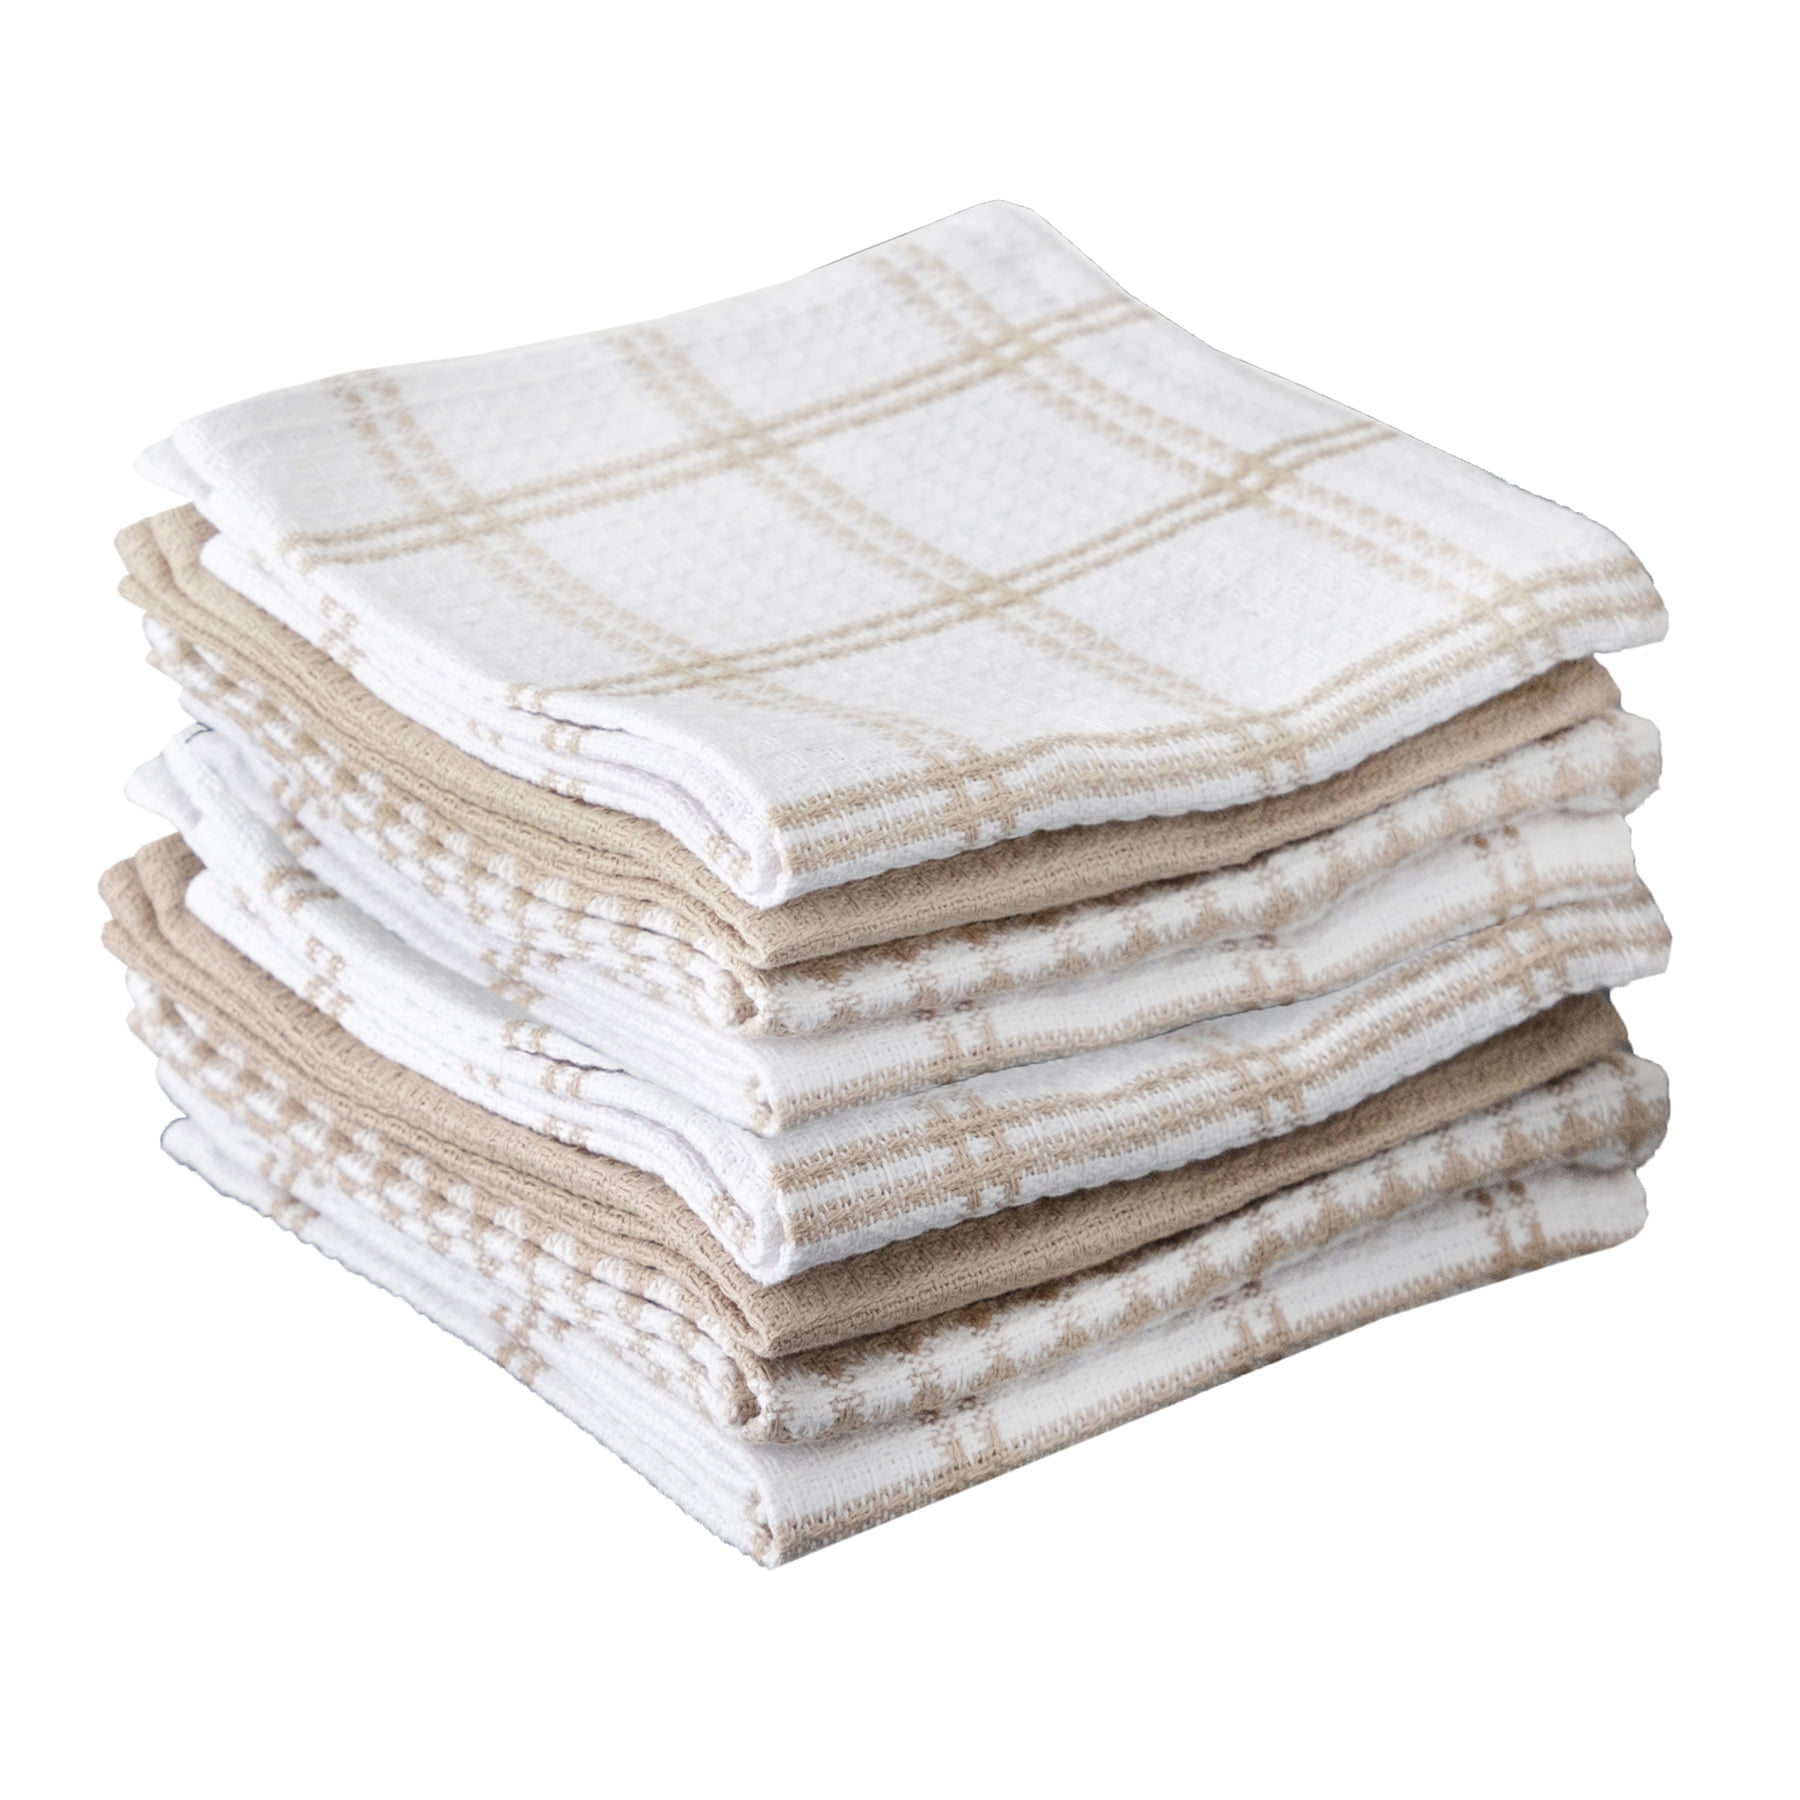 Holiday Stripe and Plaid Organic Cotton Dish Towels, Set of 2 + Reviews